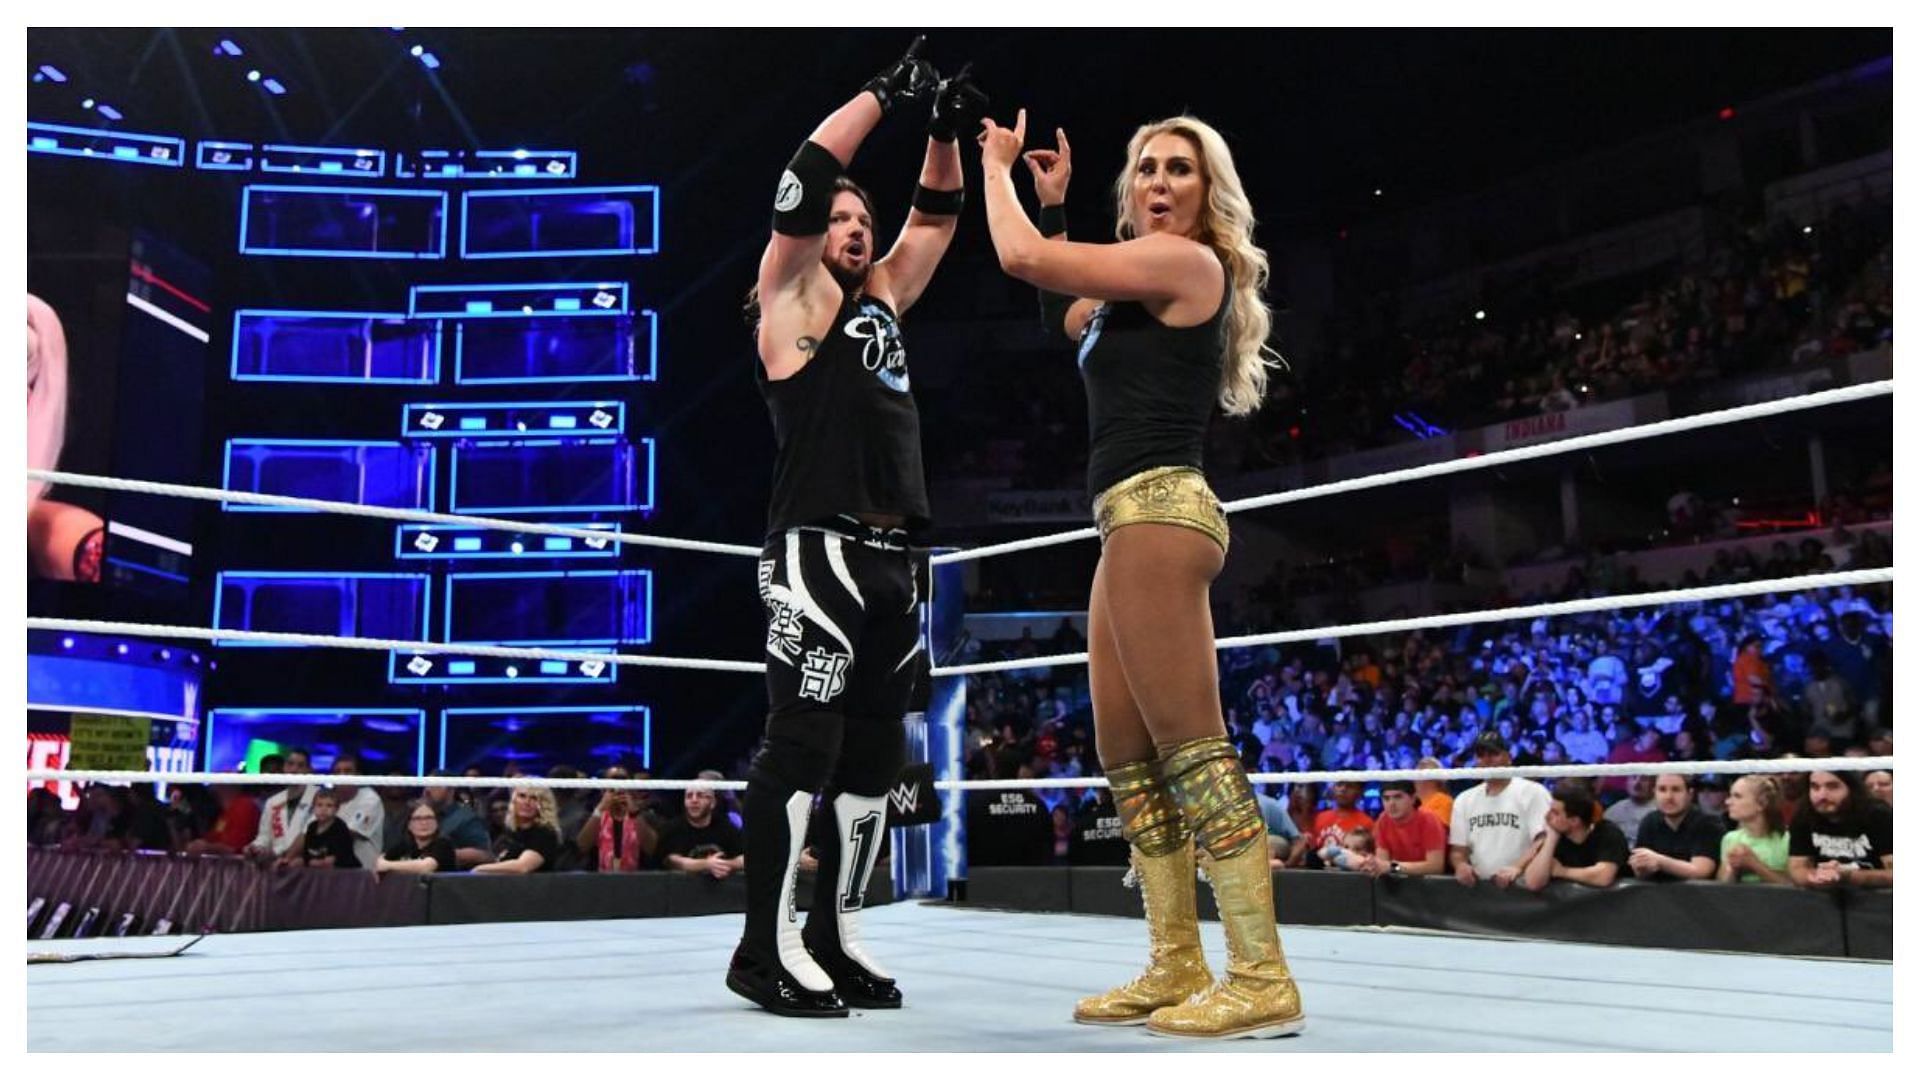 Charlotte Flair and AJ Styles have history as a team